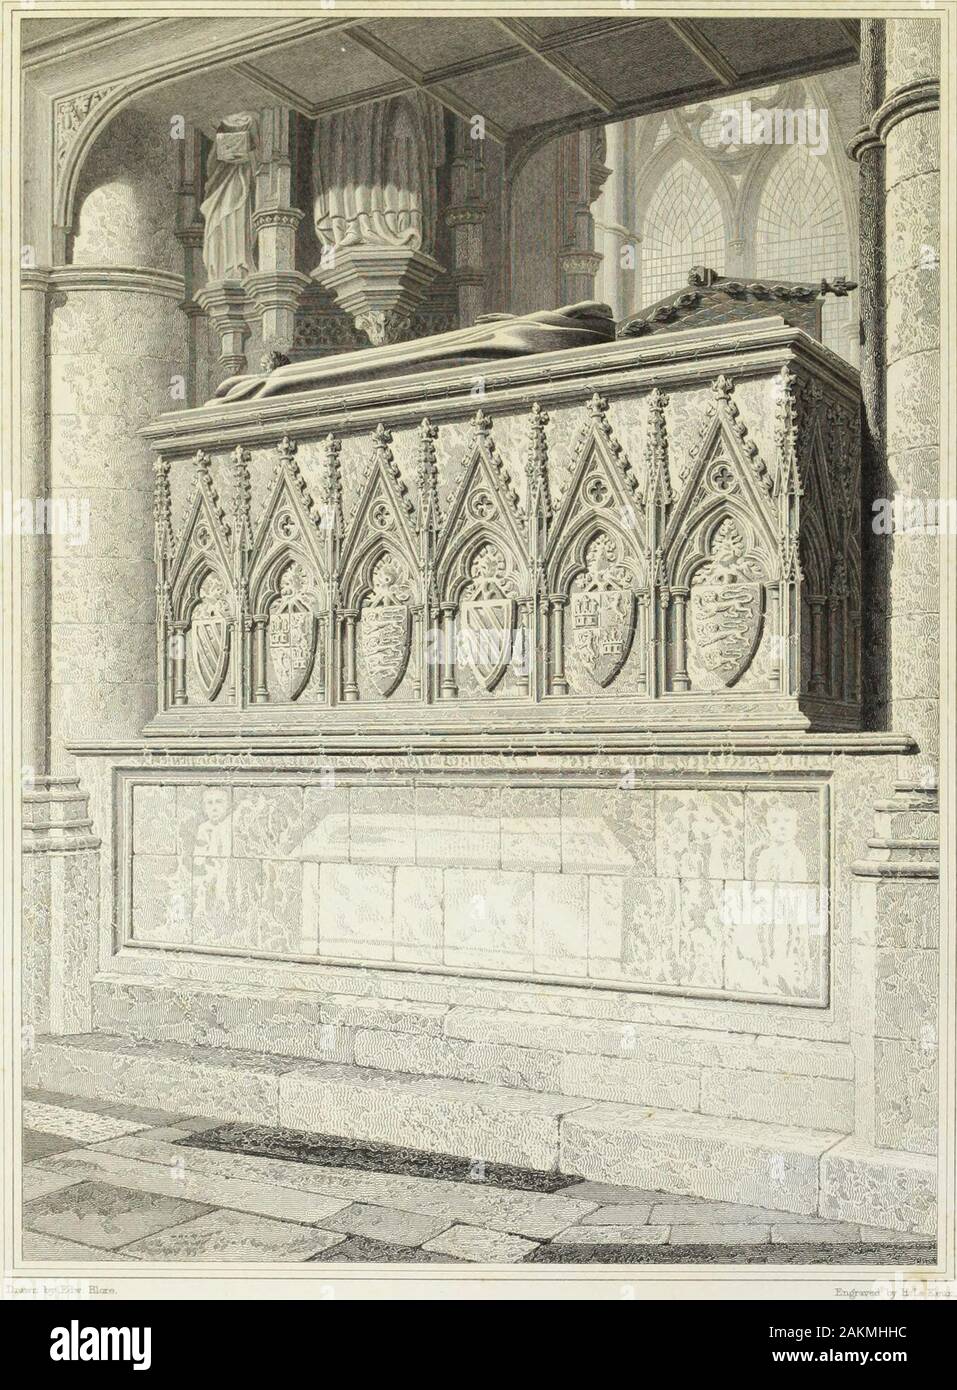 The monumental remains of noble and eminent persons : comprising the sepulchral antiquities of Great Britain . HE SAME. 14. THOMAS HATFIELD, BISHOP OF DURHAM. Durham Cathedral. - - - - - 1381 15. WILLIAM OF WYKHAM, BISHOP OF WINCHESTER. Winchester Cathedral. - 1404 16. EFFIGY OF THE SAME. CONTENTS. 17. JOHN GOWER. St. Saviours Churchy Southward. - 1408 18. KING HENRY THE FOURTH AND HIS QUEEN. Canterbury Cathedral. - 1412 19. EFFIGY OF THE SAME. 20. THOMAS FITZALAN, EARL OF ARUNDEL. Arundel Church. - - - - - 1415 21. RALPH NEVILLE, EARL OF WESTMORLAND. Staindrop Church. - 1425 22. ARCHIBALD Vth Stock Photo